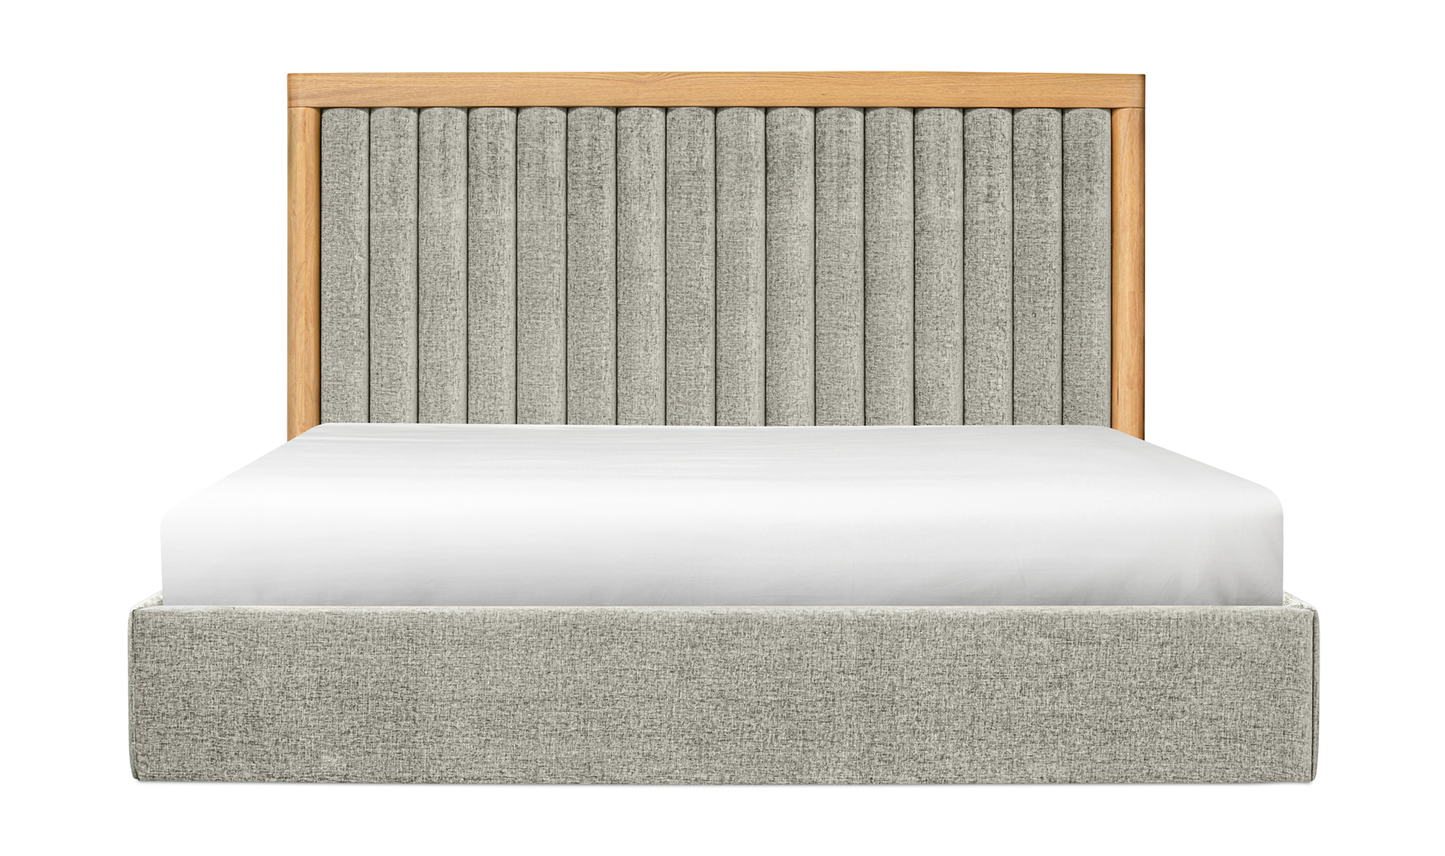 NINA BED COLLECTION